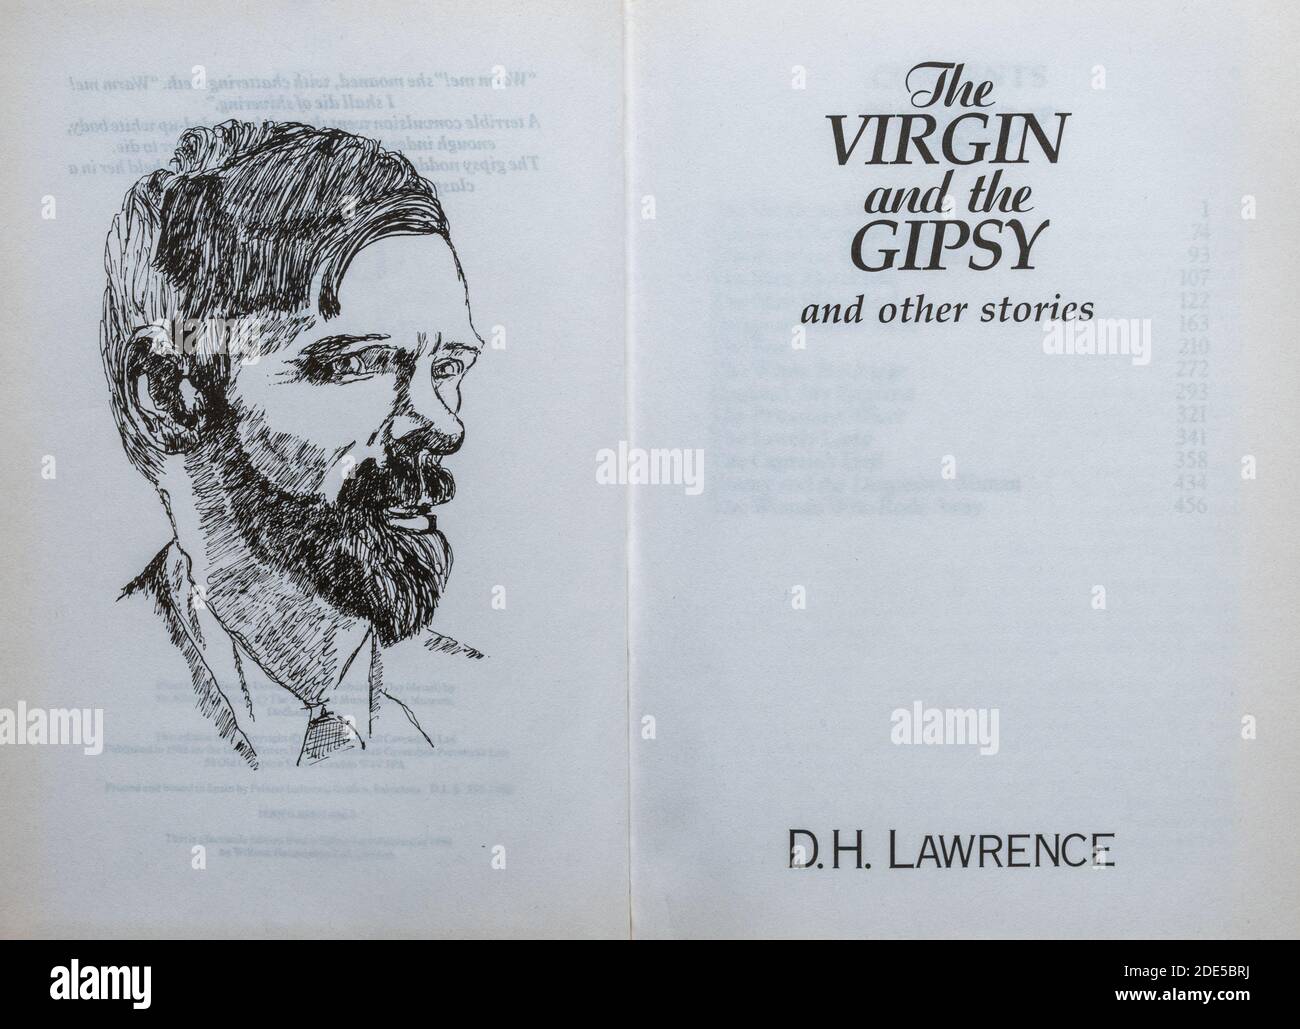 The Virgin and the Gipsy and other stories, book - novel by D. H. Lawrence. Title page and drawing of the author. Stock Photo